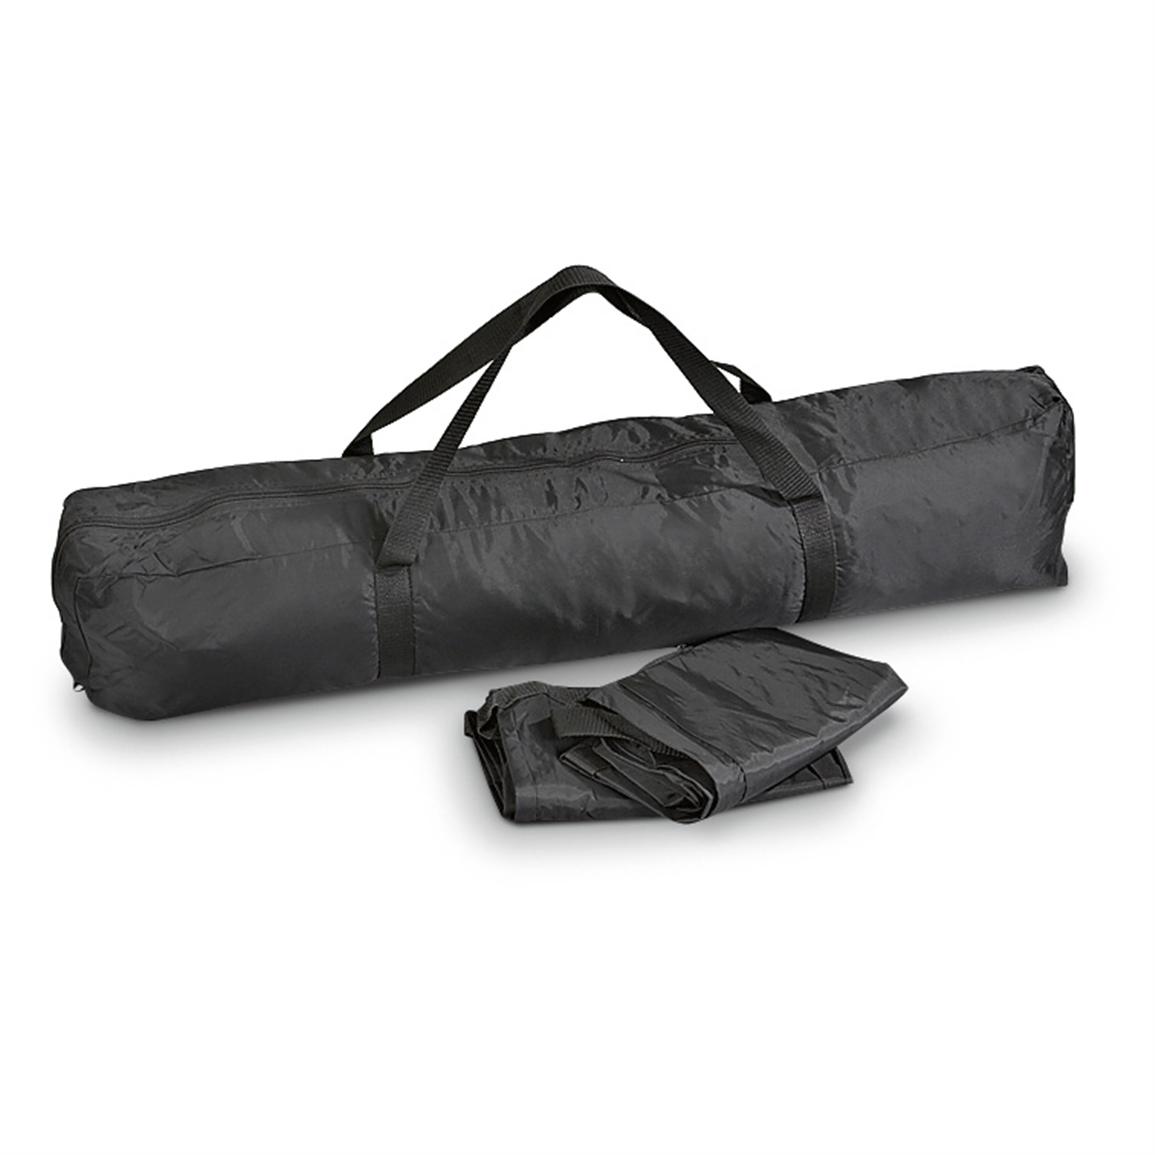 3 New Tent Storage Bags Black 157769 Equipment Bags At Sportsman39s